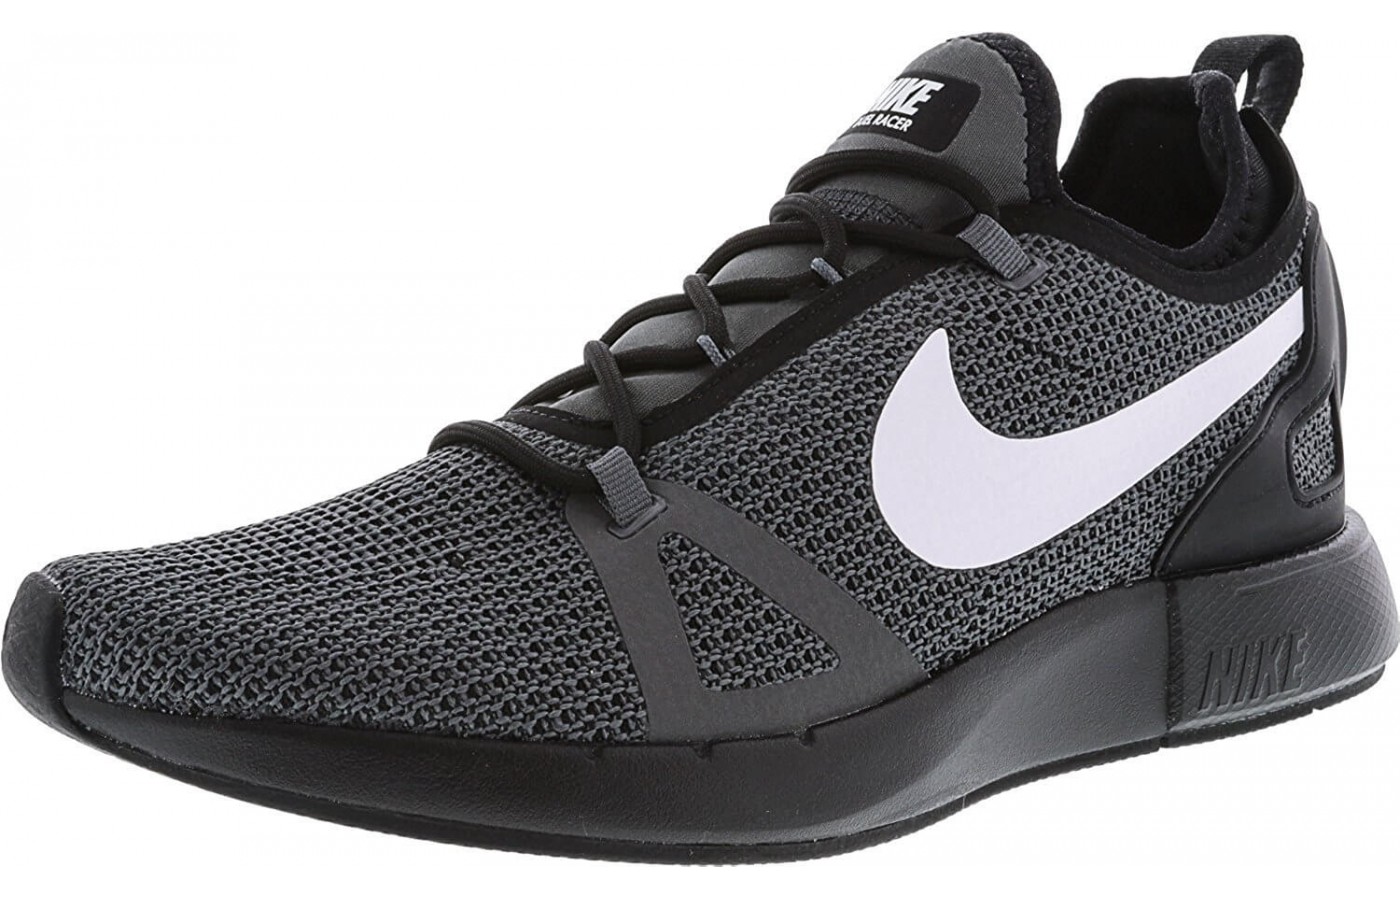 The Nike Duel Racer features a Phylon midsole